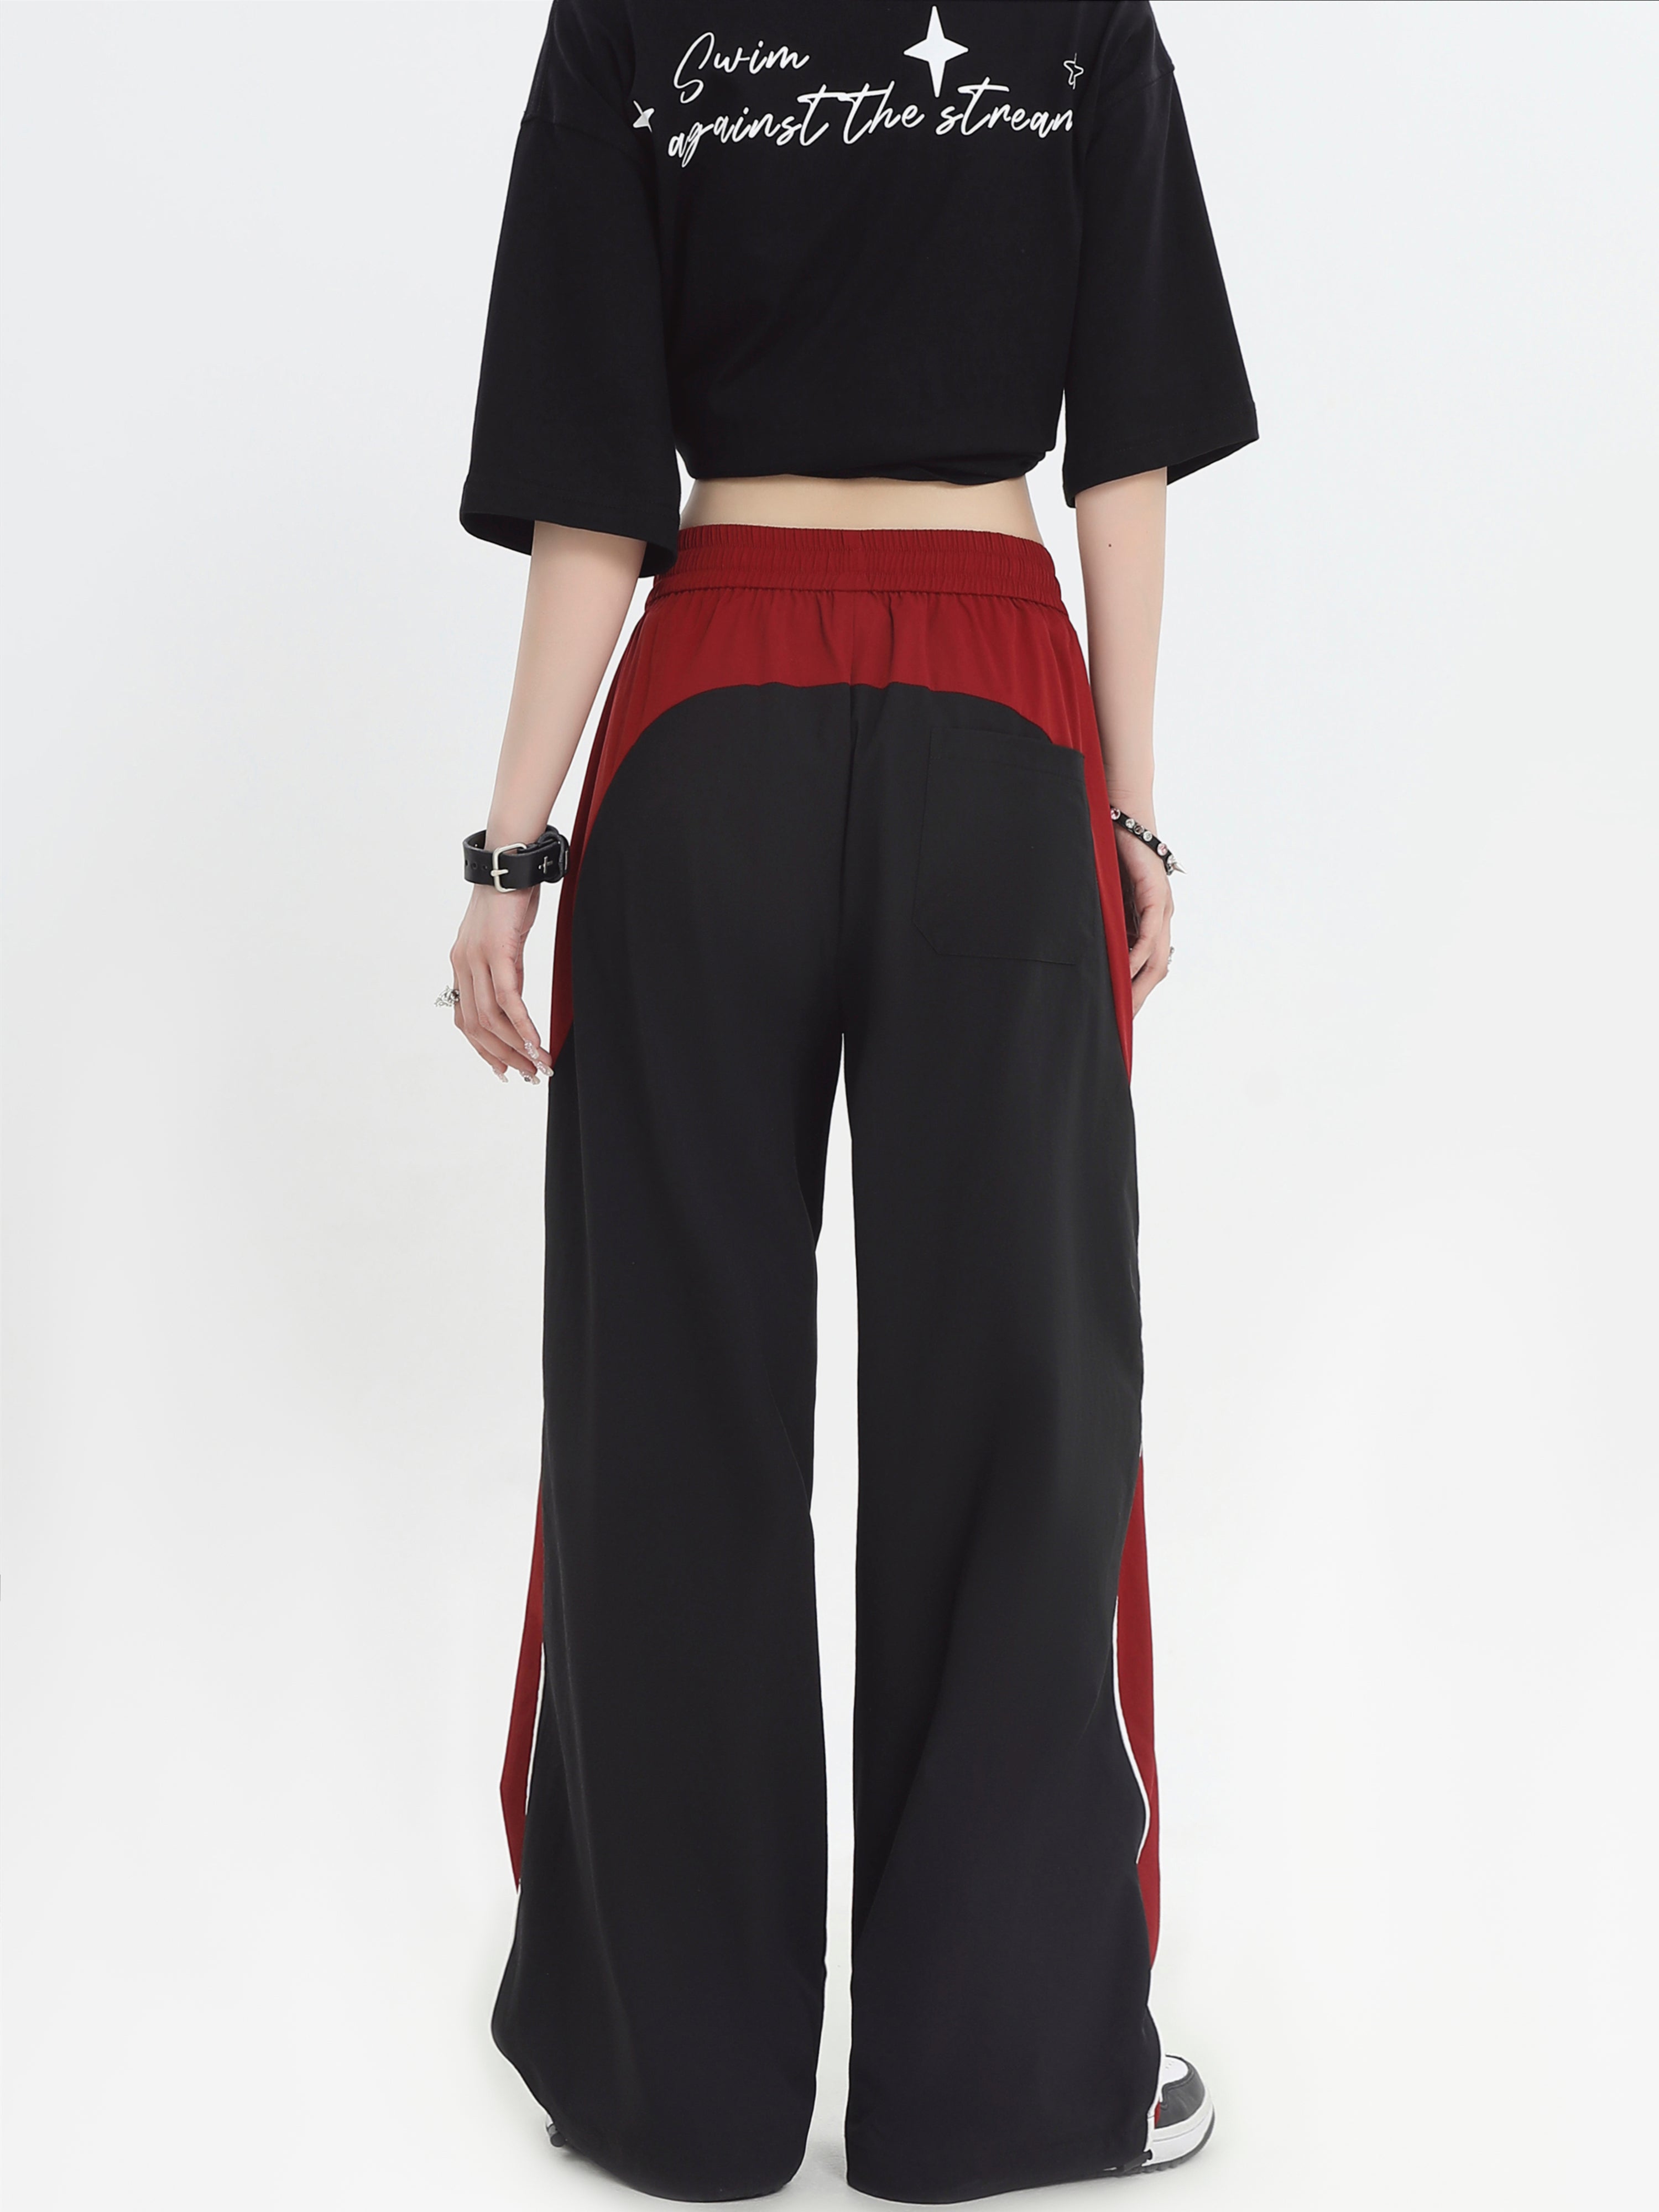 Contrast Stitched Clip Strip Casual Trousers - chiclara